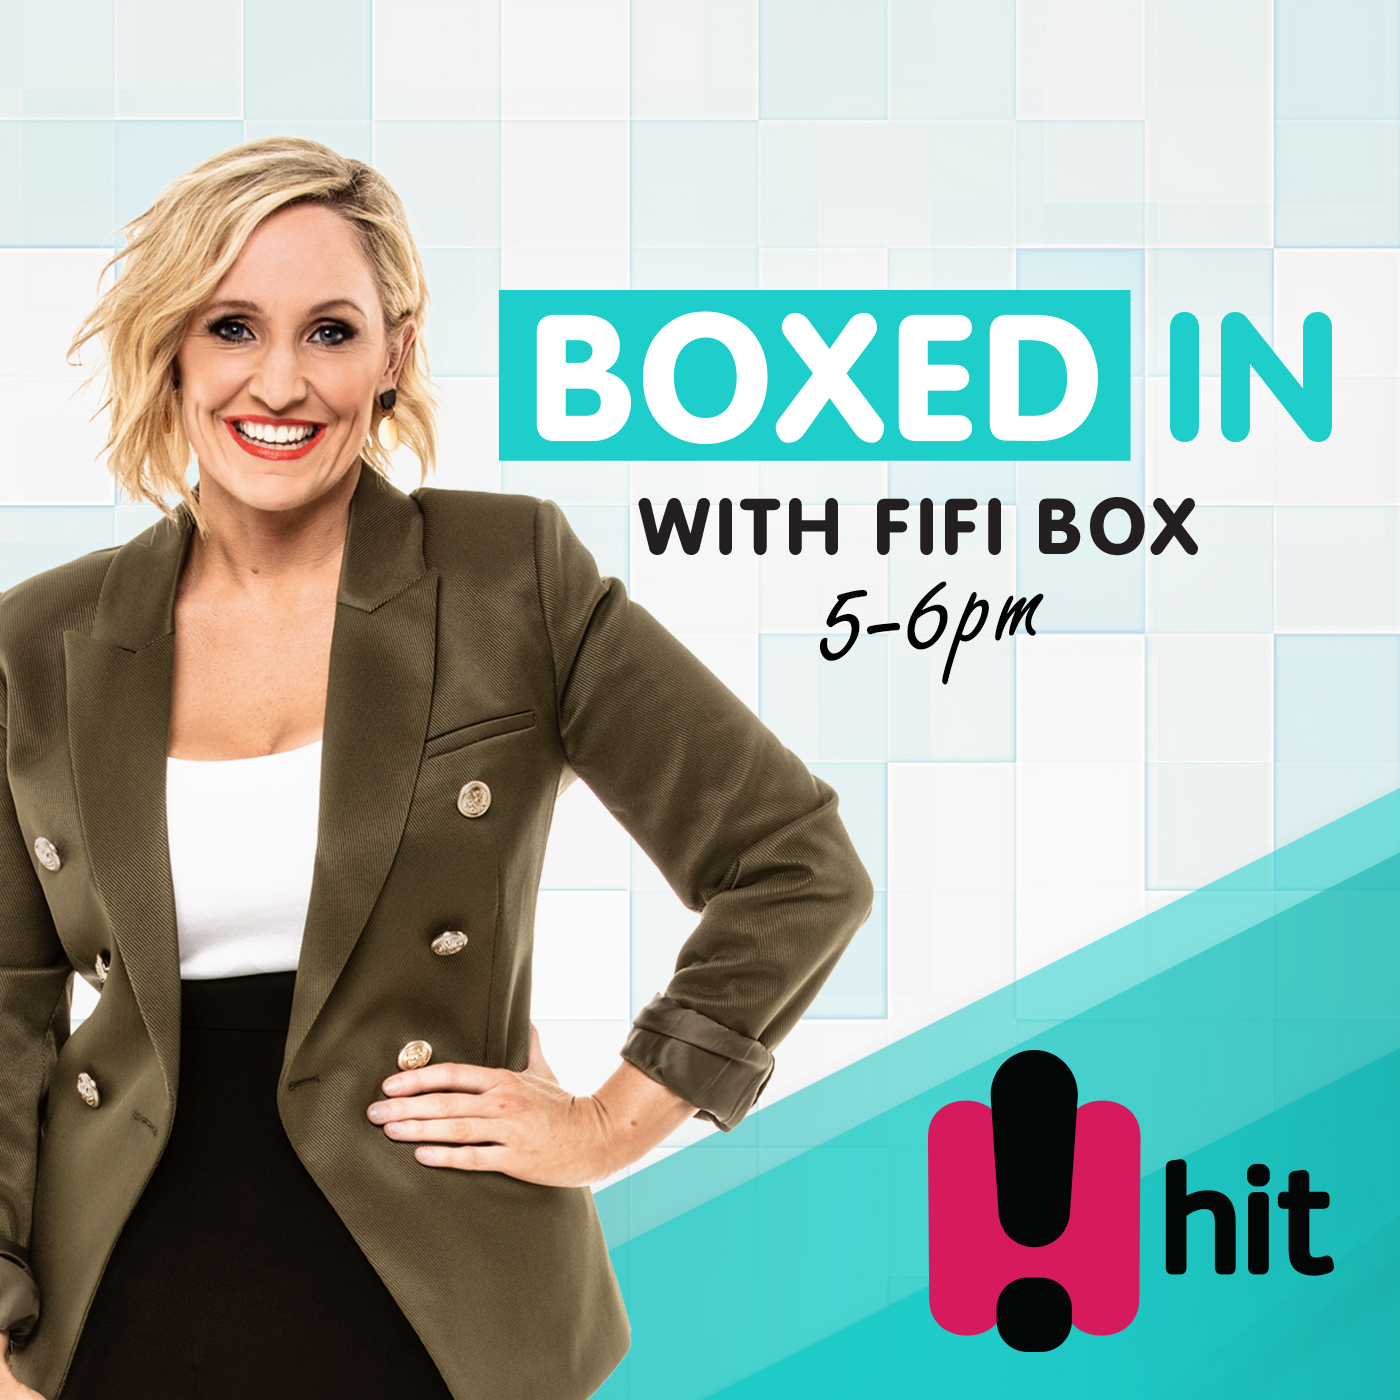 BOXED IN WITH NATALIE BASSINGTHWAIGHTE